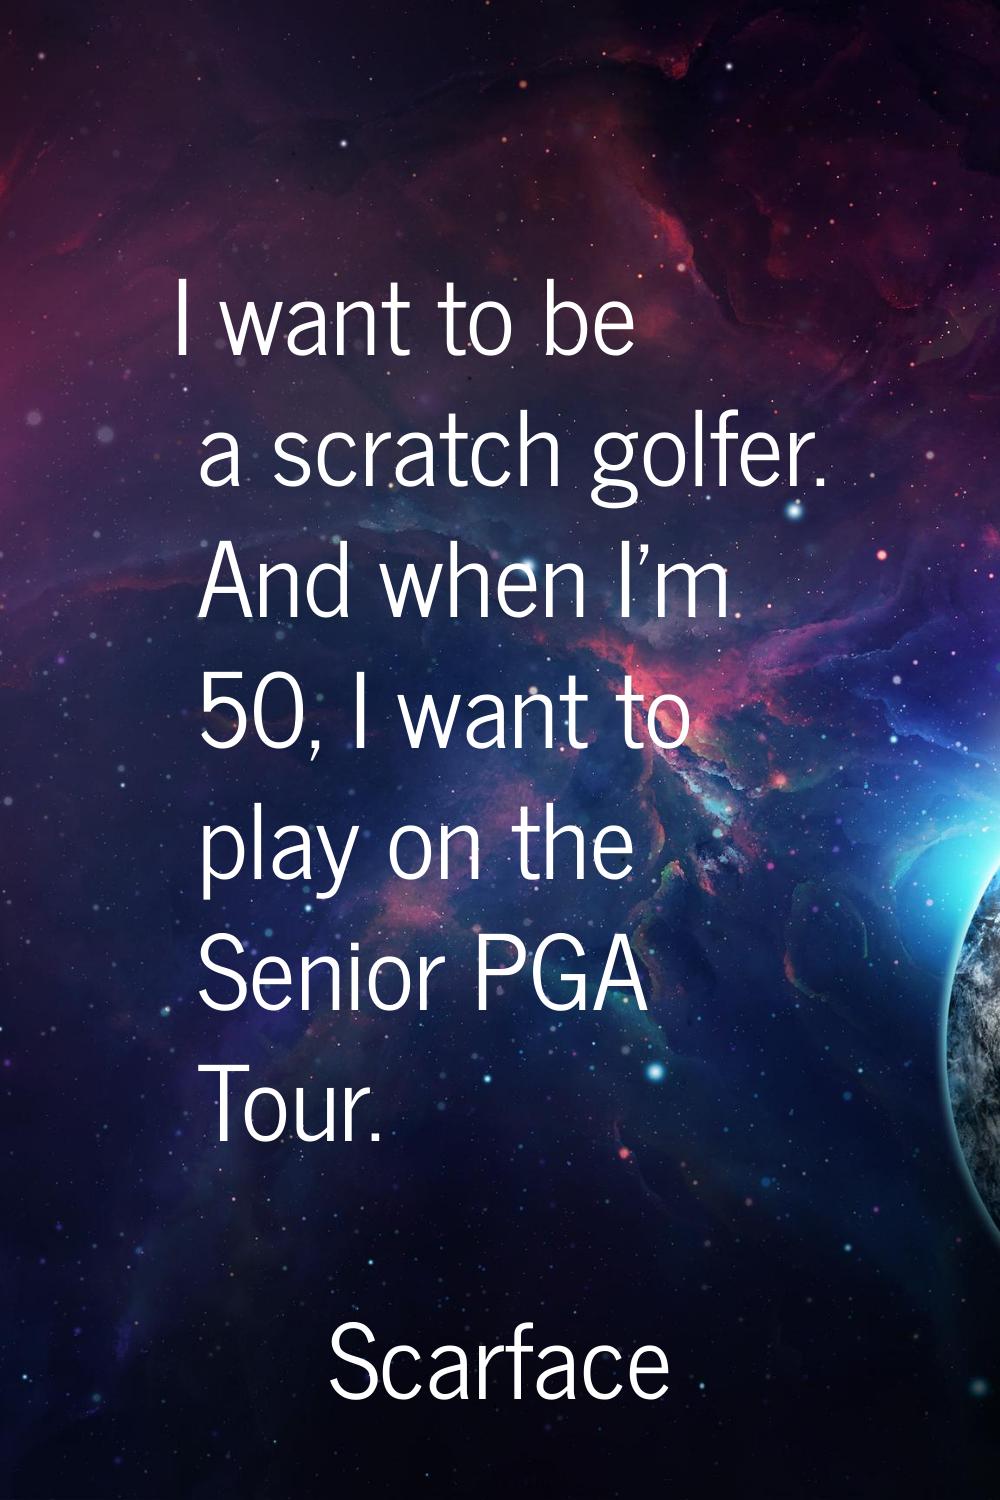 I want to be a scratch golfer. And when I'm 50, I want to play on the Senior PGA Tour.